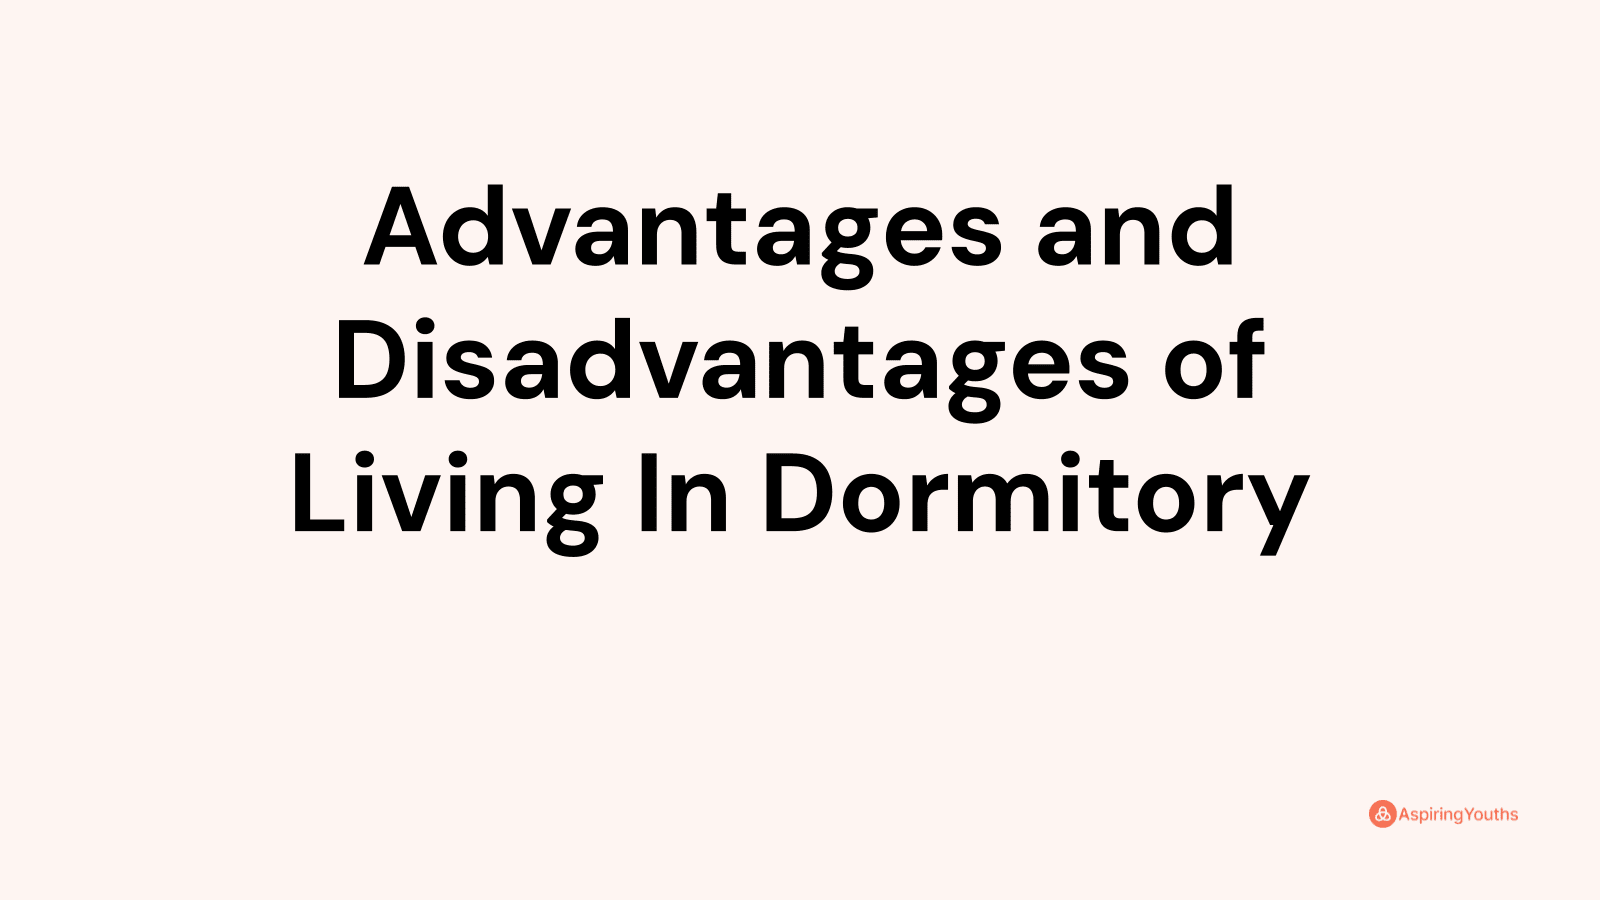 Advantages and disadvantages of Living In Dormitory